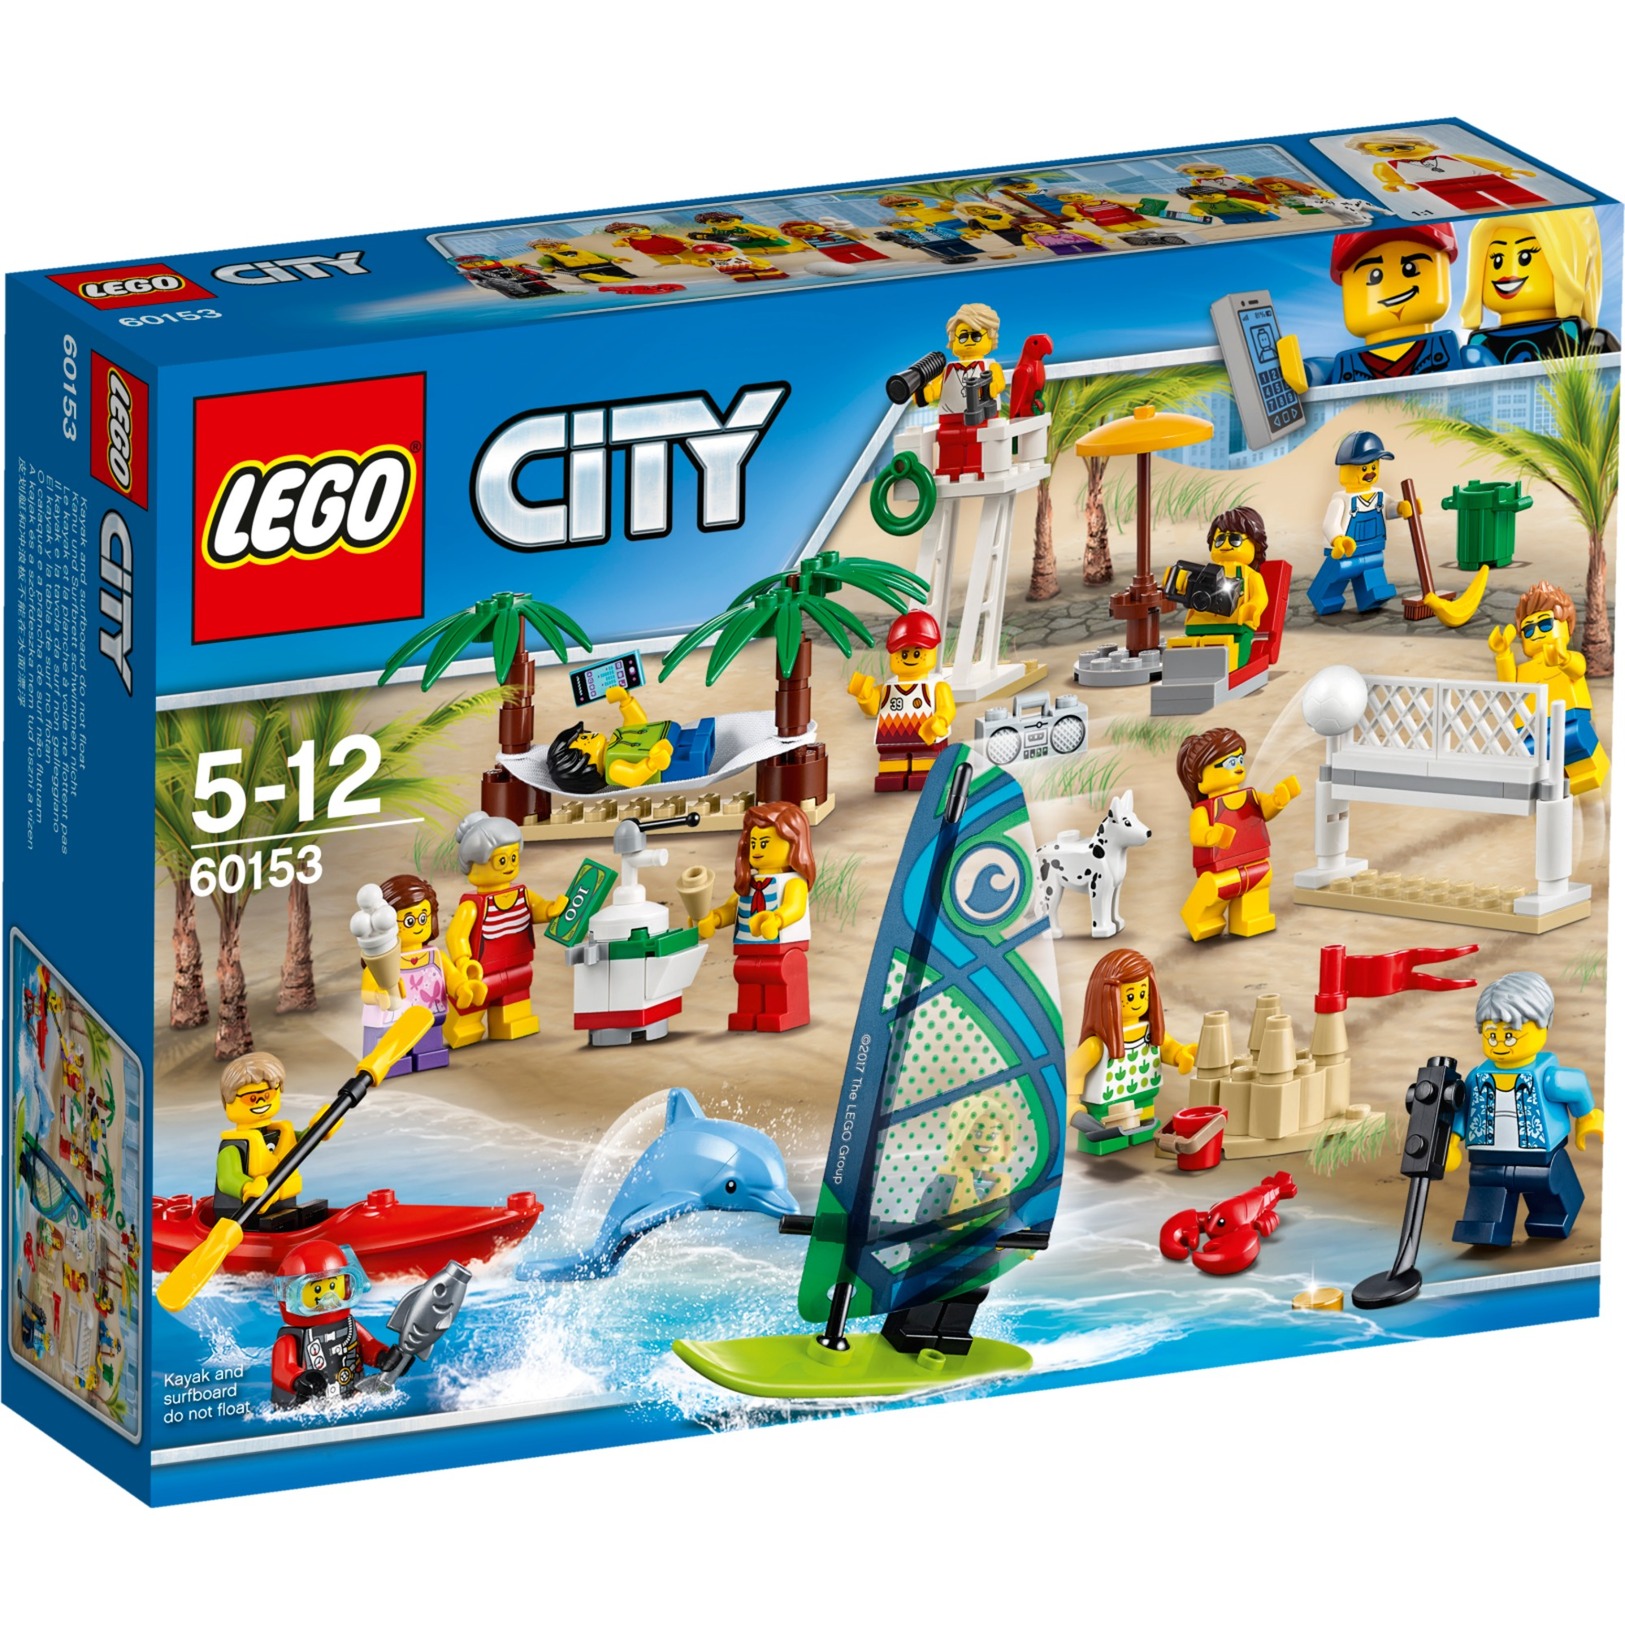 Lego City People Pack Fun At The Beach Construction Toys